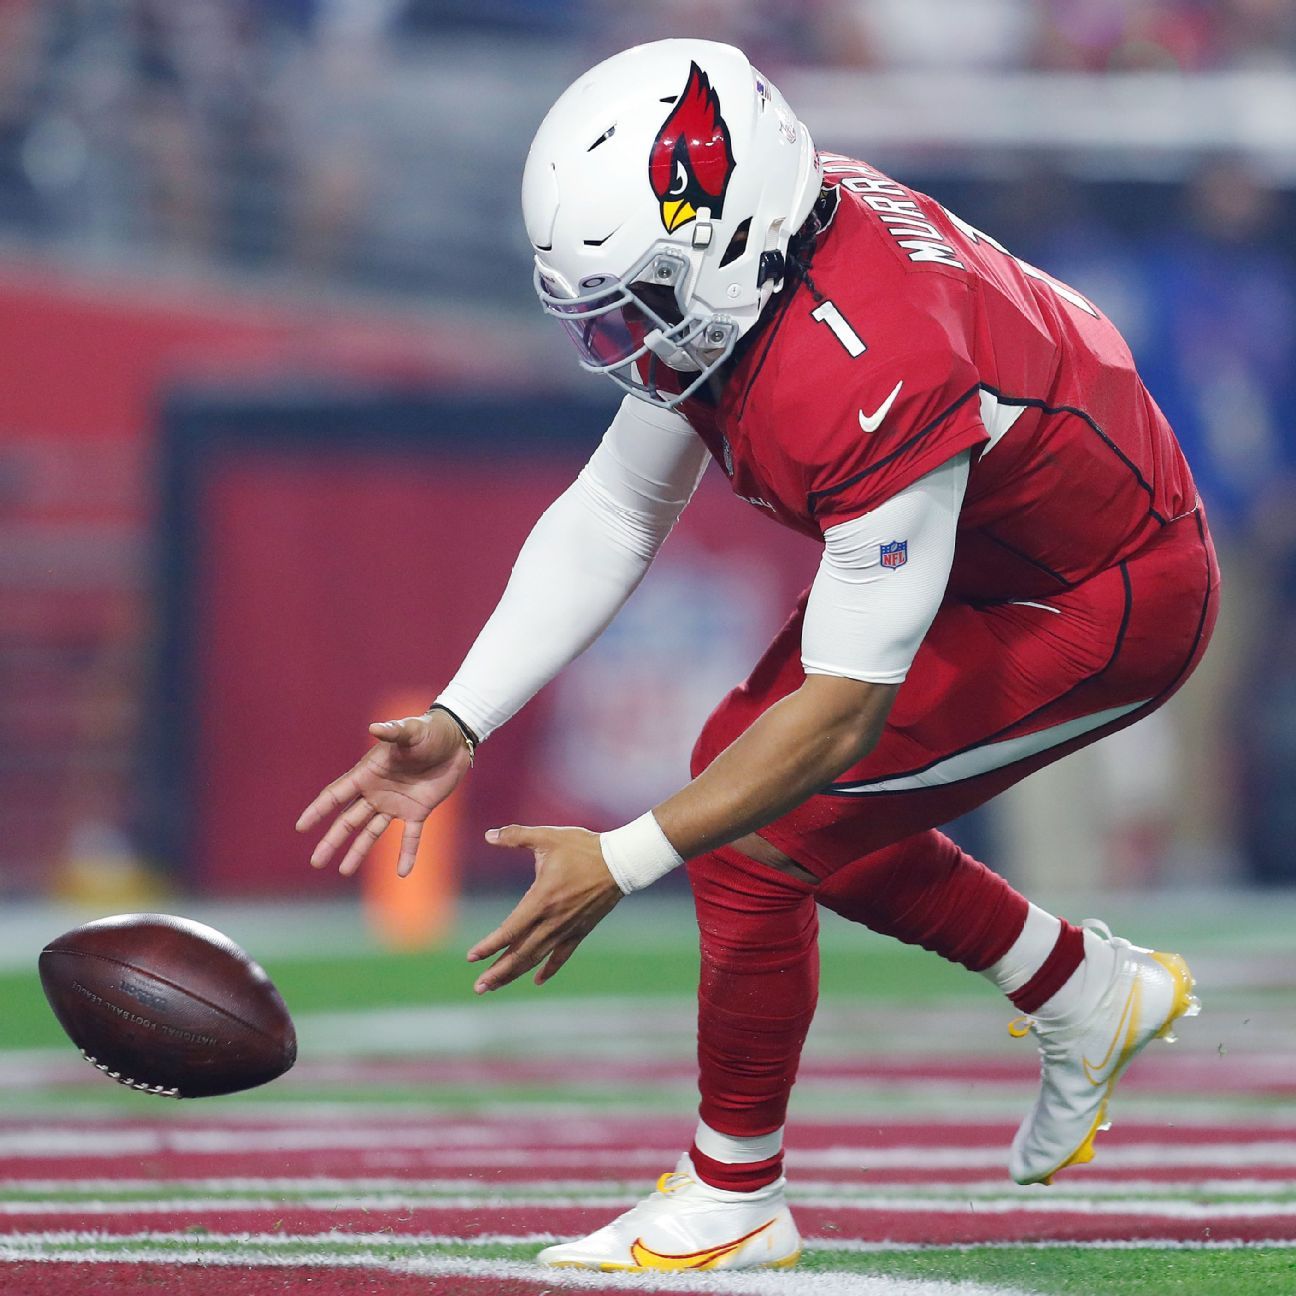 <div>Bad snap to Kyler Murray leads to safety that pads Colts' lead</div>